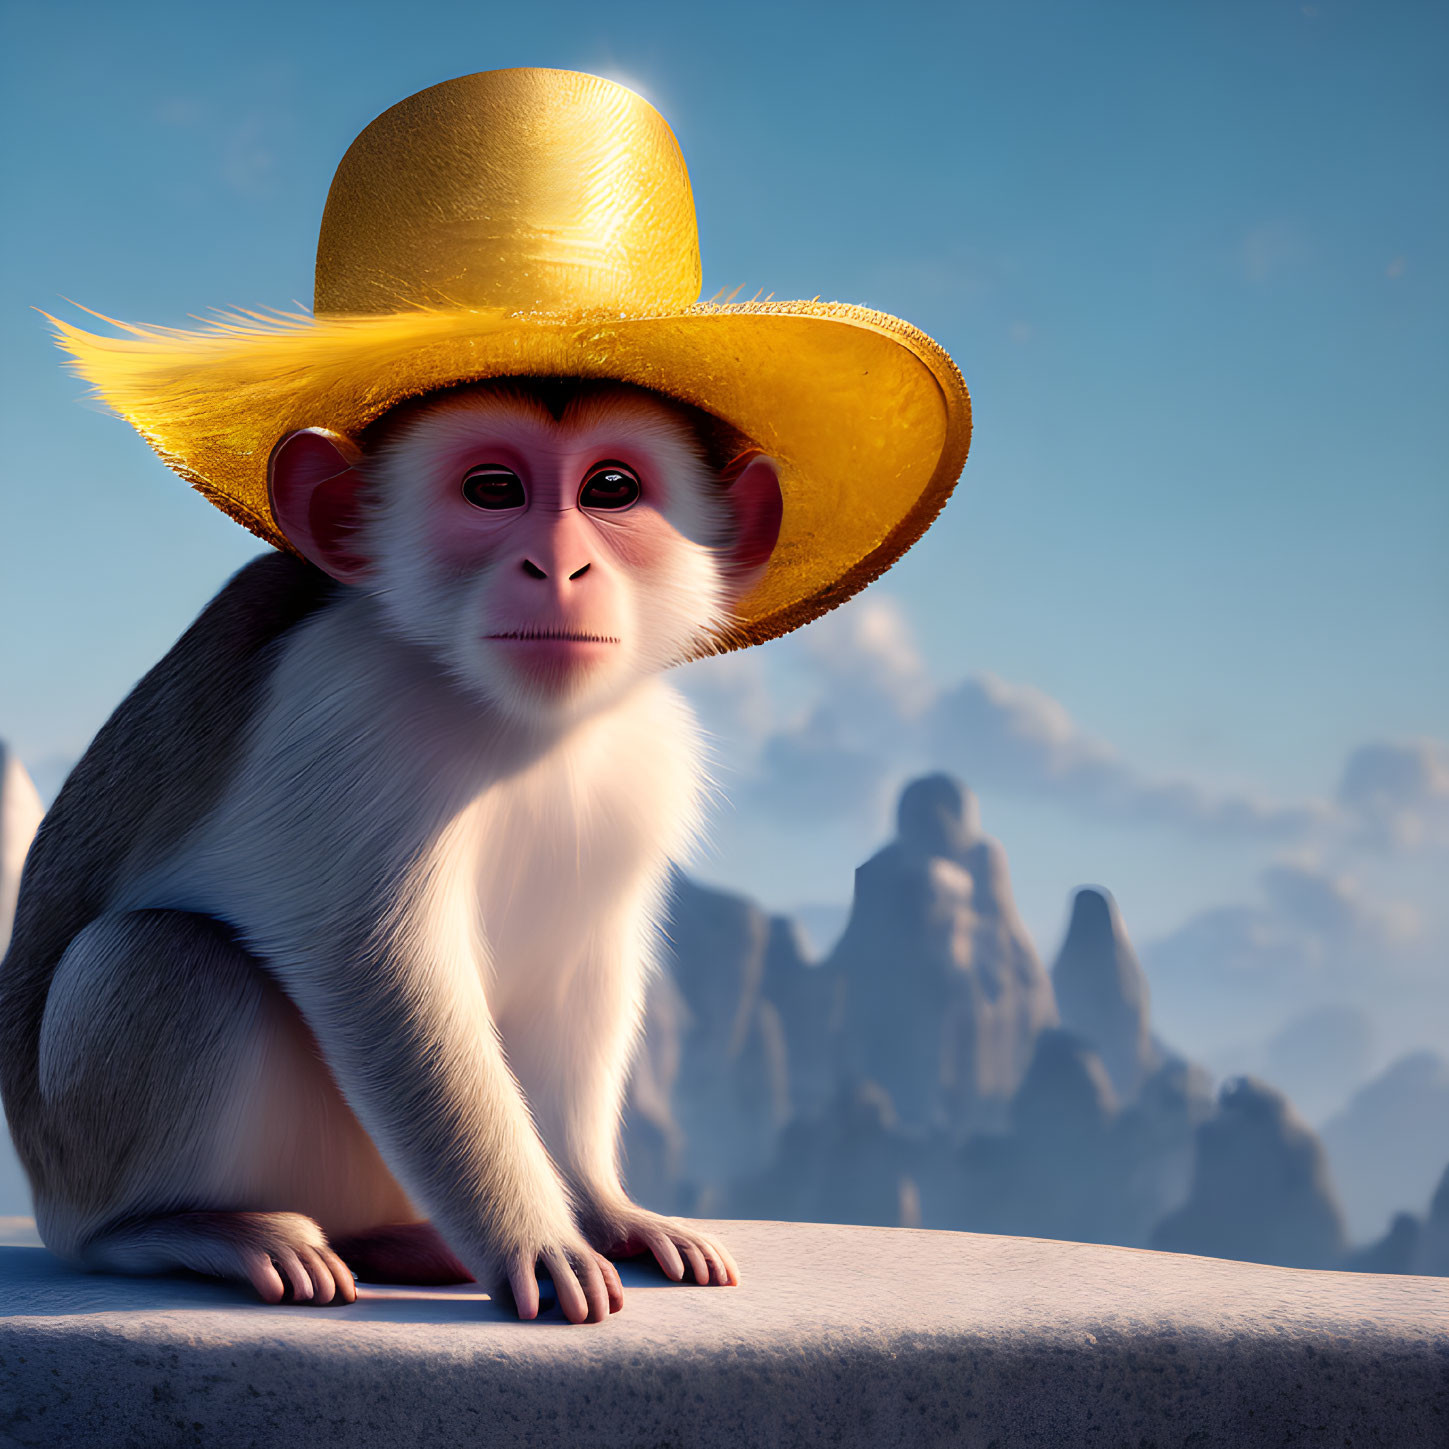 White and Grey Animated Monkey with Golden Hat on Ledge against Blue Sky